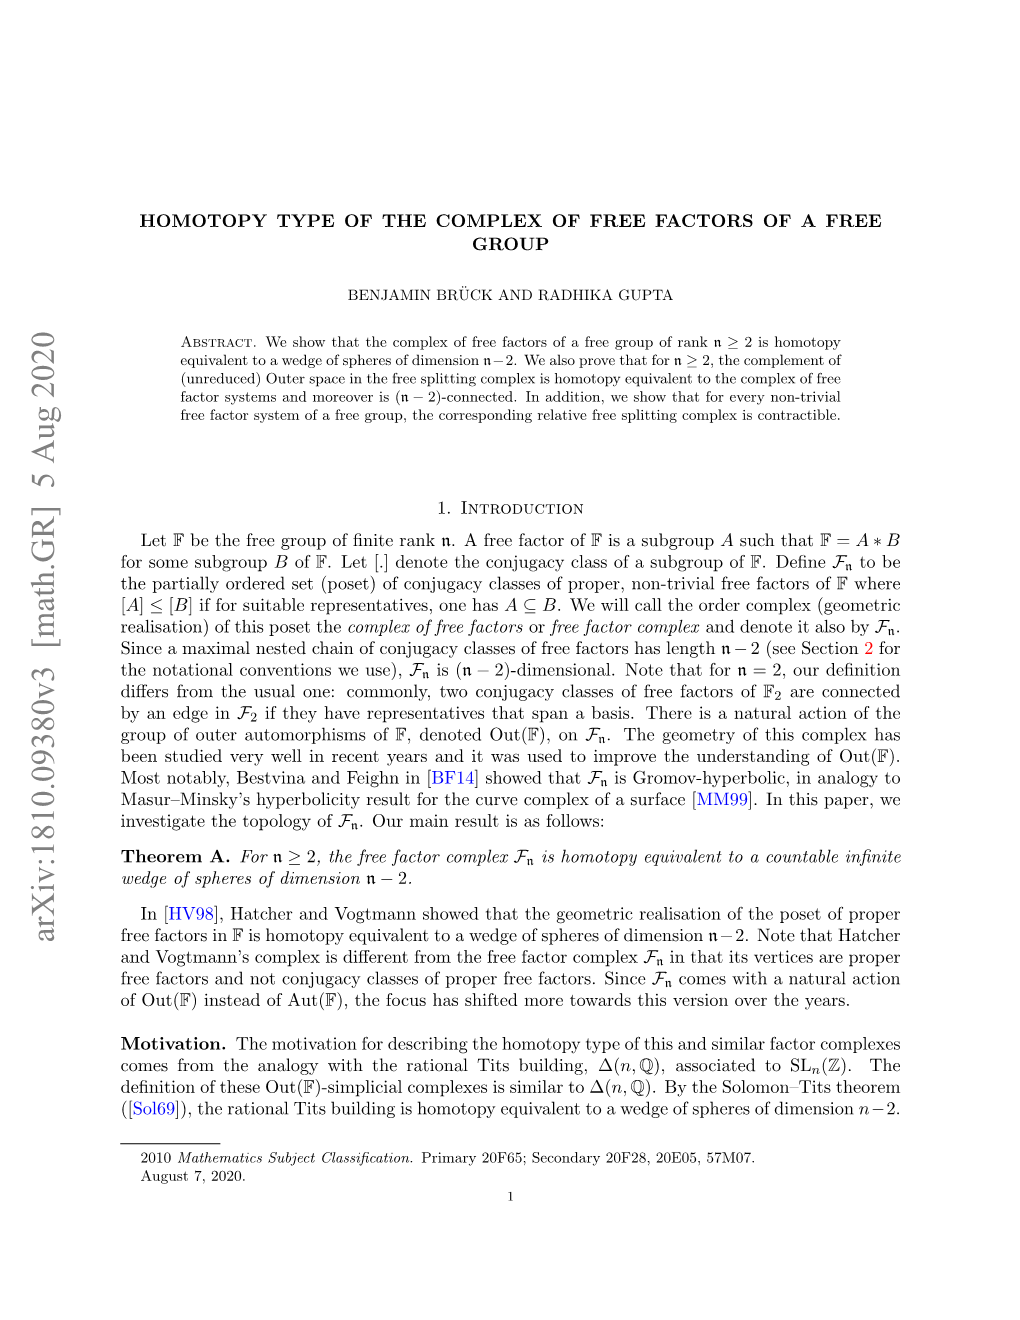 Arxiv:1810.09380V3 [Math.GR] 5 Aug 2020 Free Factors in F Is Homotopy Equivalent to a Wedge of Spheres of Dimension N−2